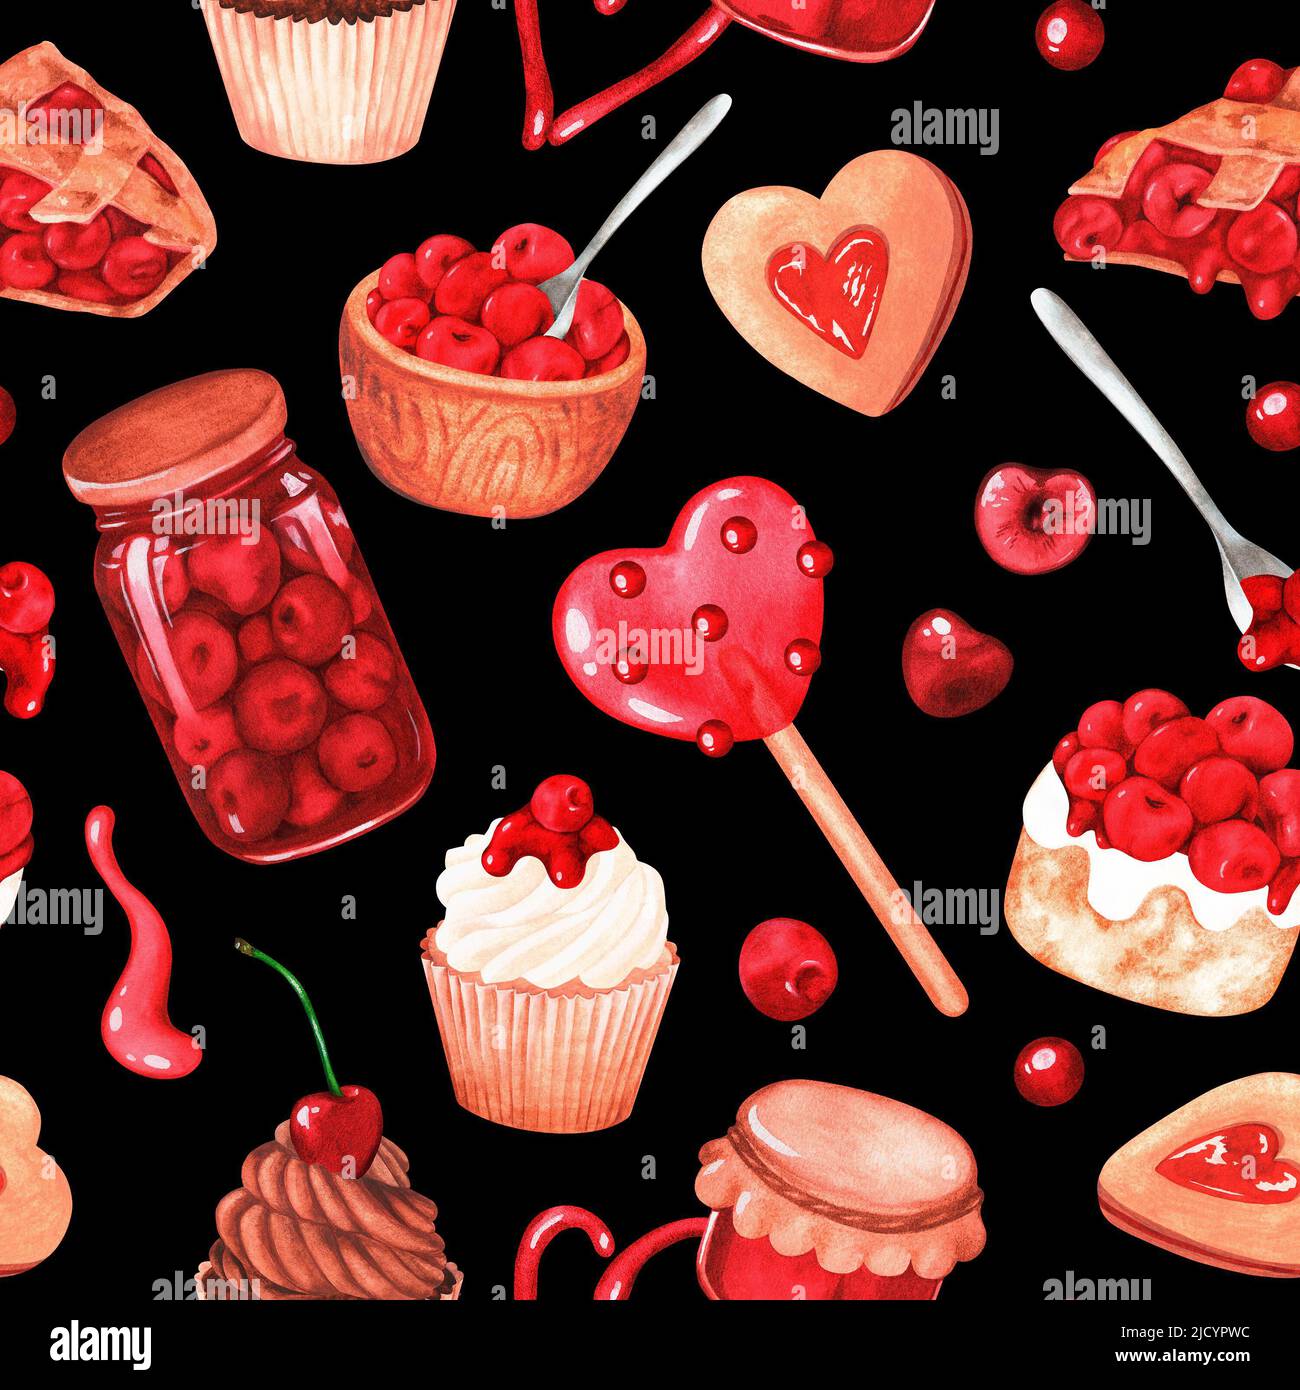 Cherry sweets Seamless Pattern. Watercolor illustration. Isolated on a black background. For your design fabrics, packaging paper, cookbooks, aprons Stock Photo